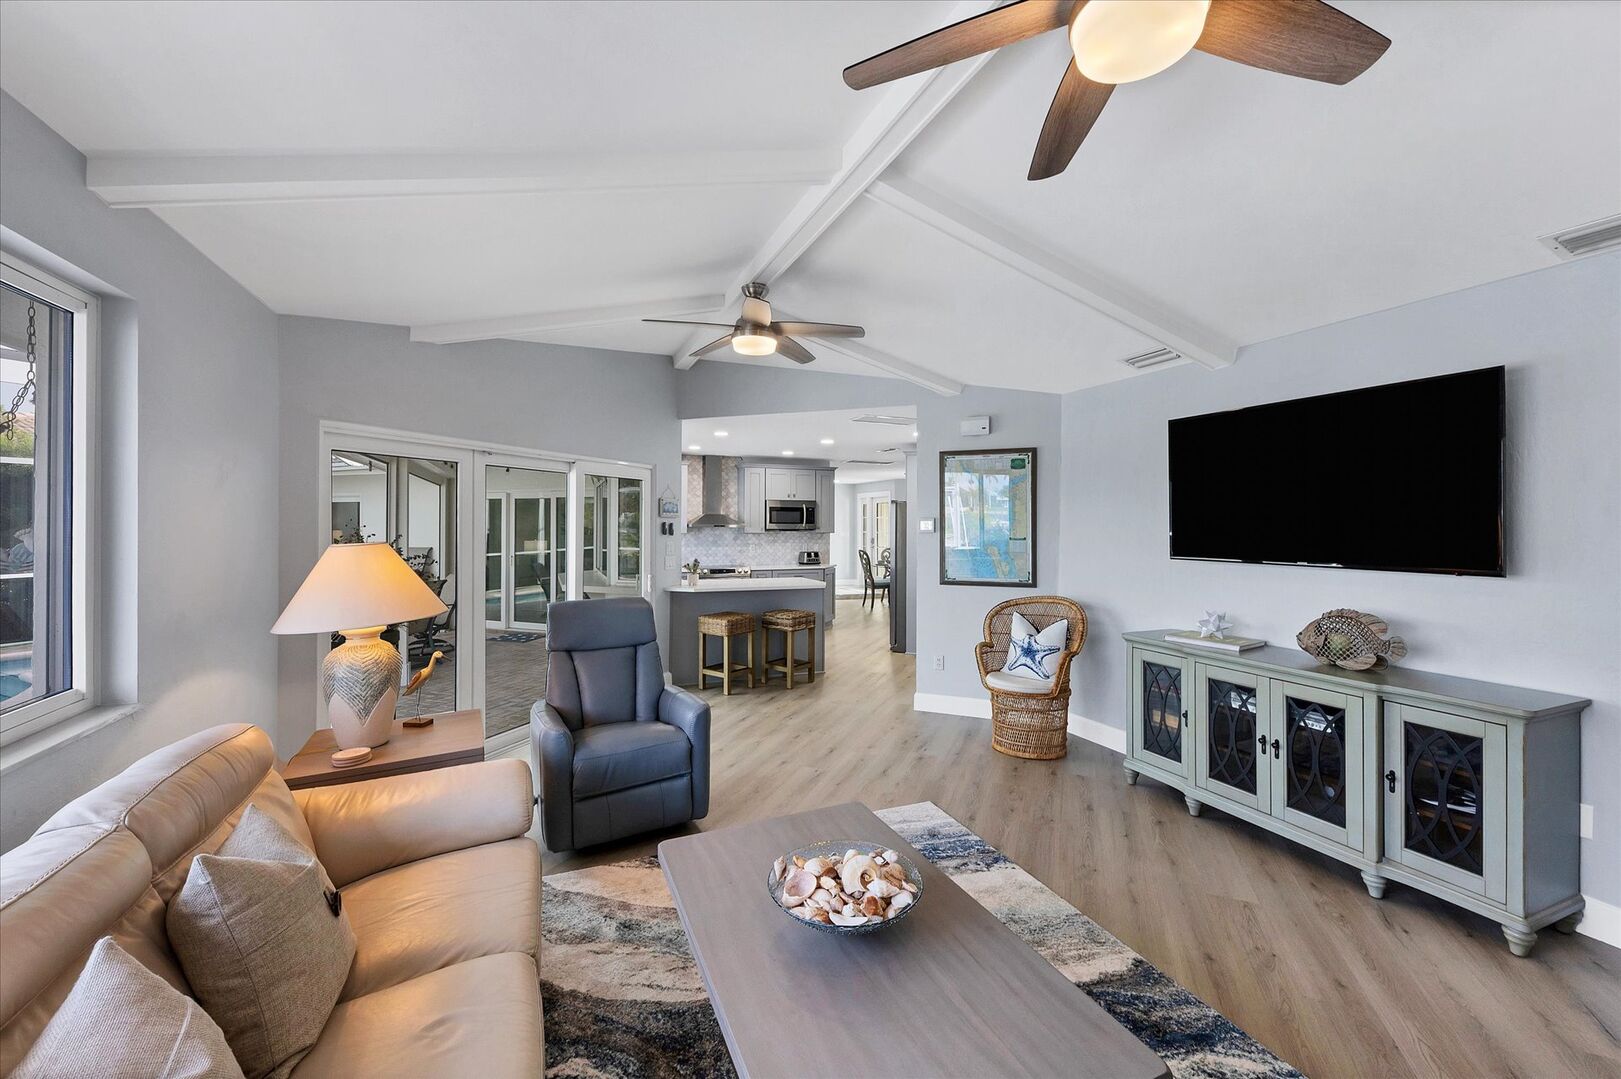 Family room with ample seating and 50